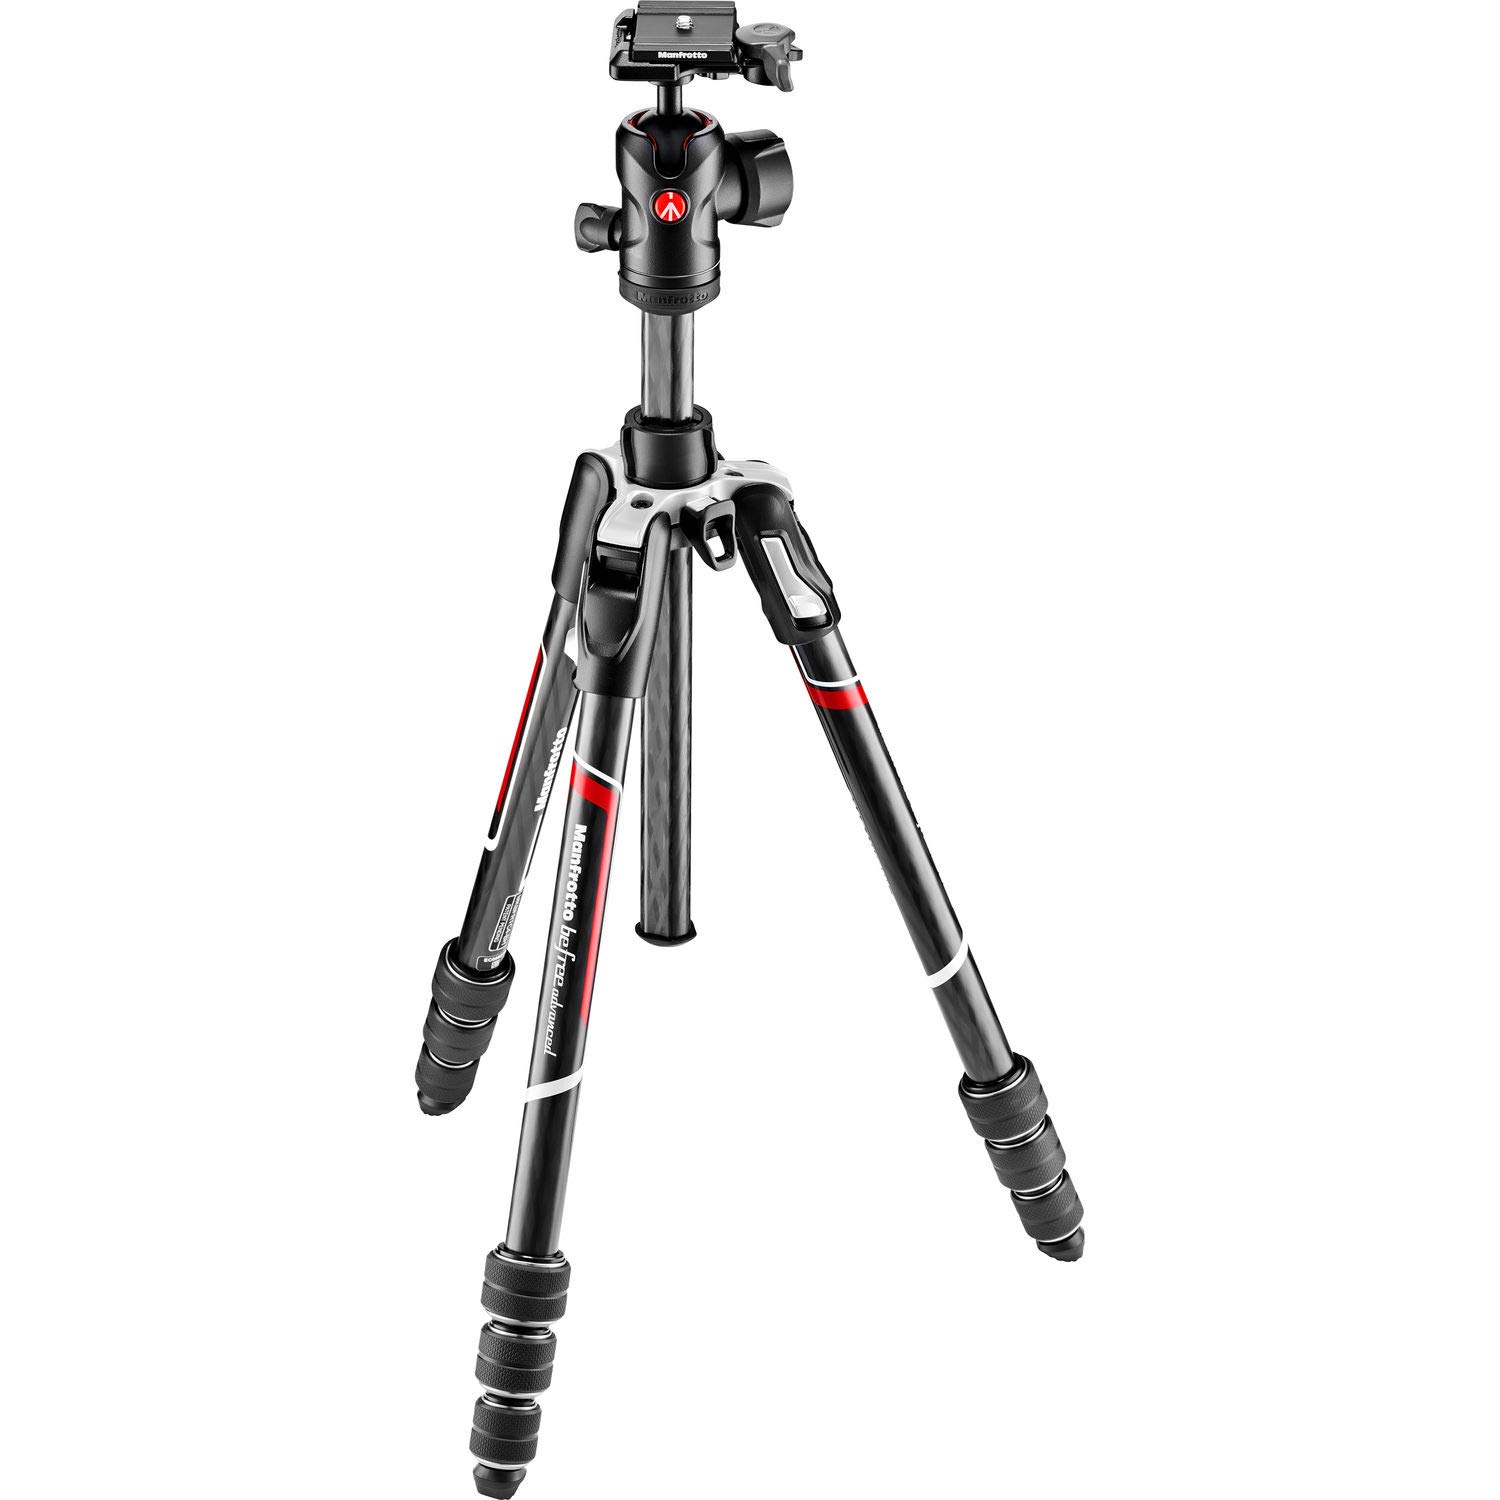 Manfrotto Befree Advanced Twist Camera Tripod Kit, Travel Tripod Kit with Fluid Head and Twist Closure, Portable and Compact,…